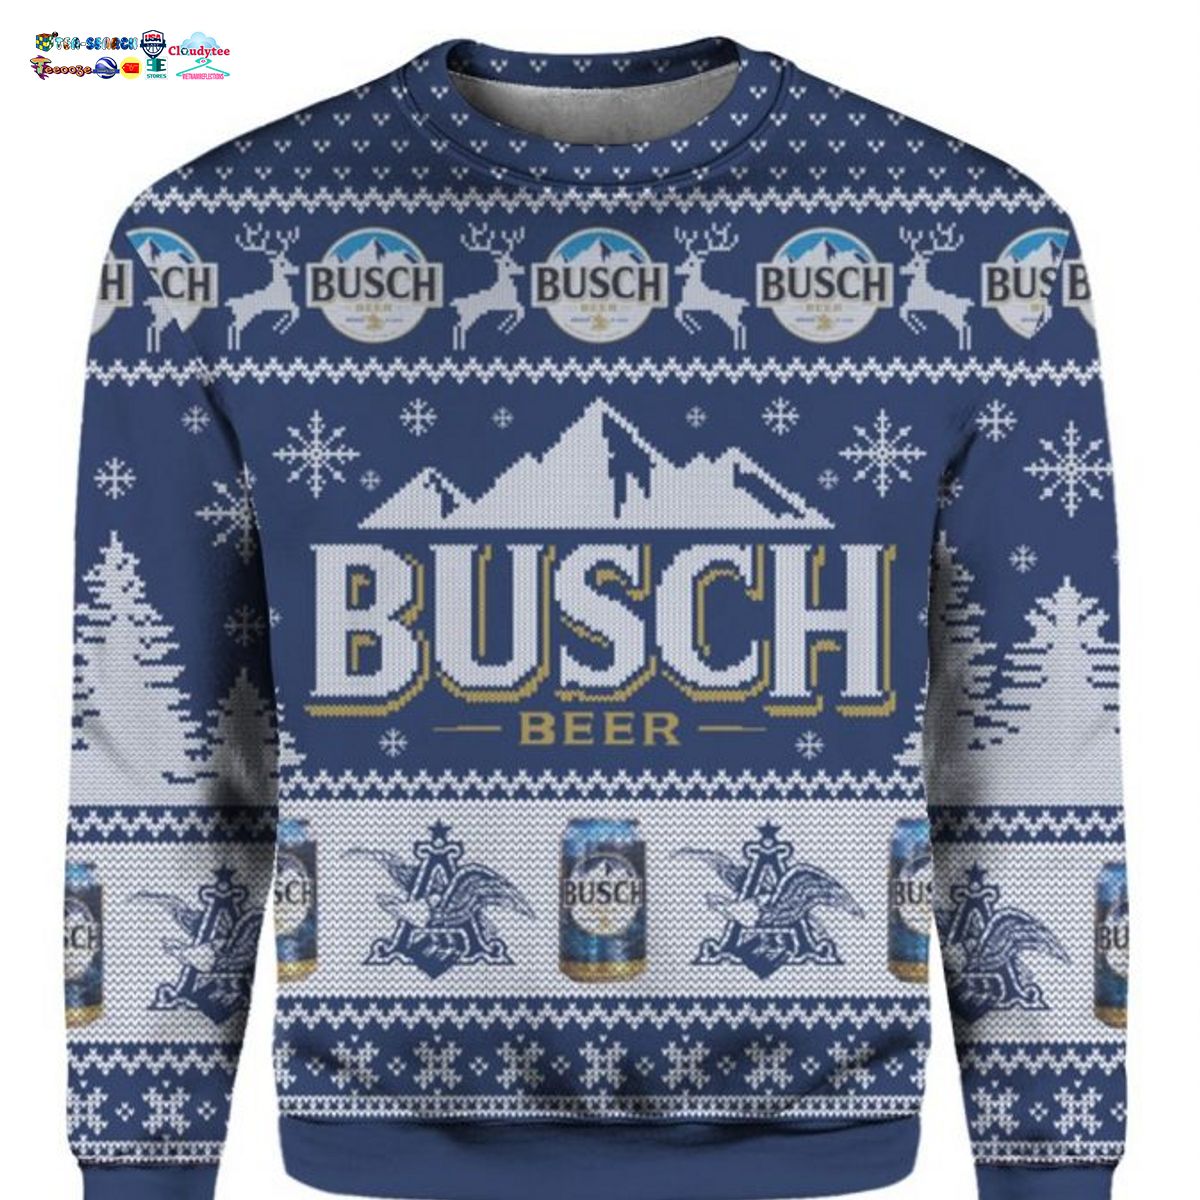 Busch Beer Ver 3 Ugly Christmas Sweater